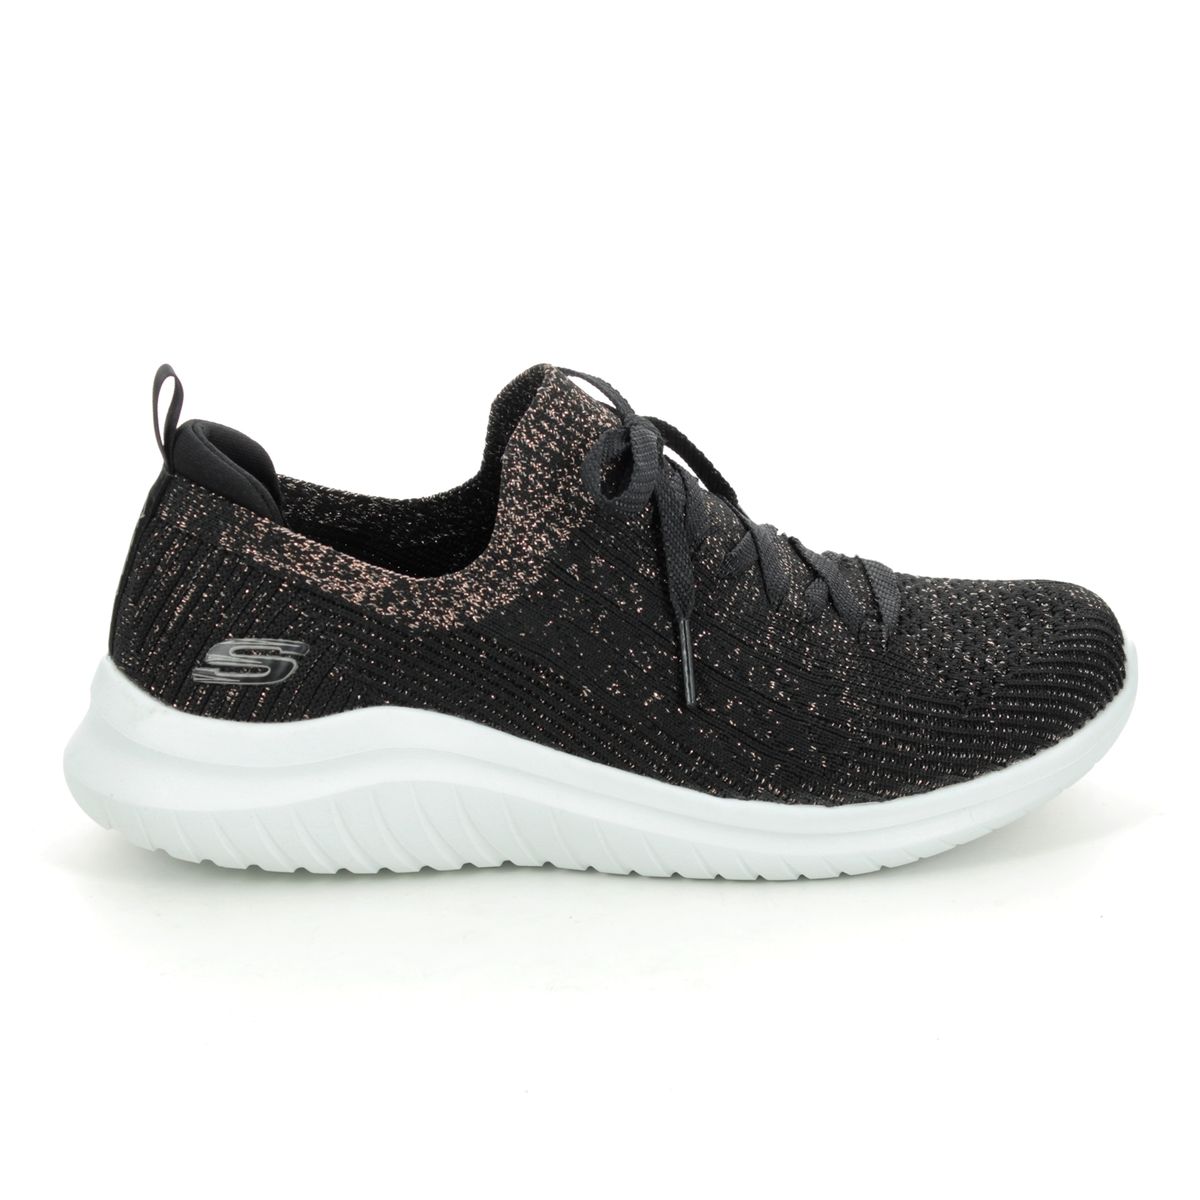 skechers black sparkle trainers,Quality 